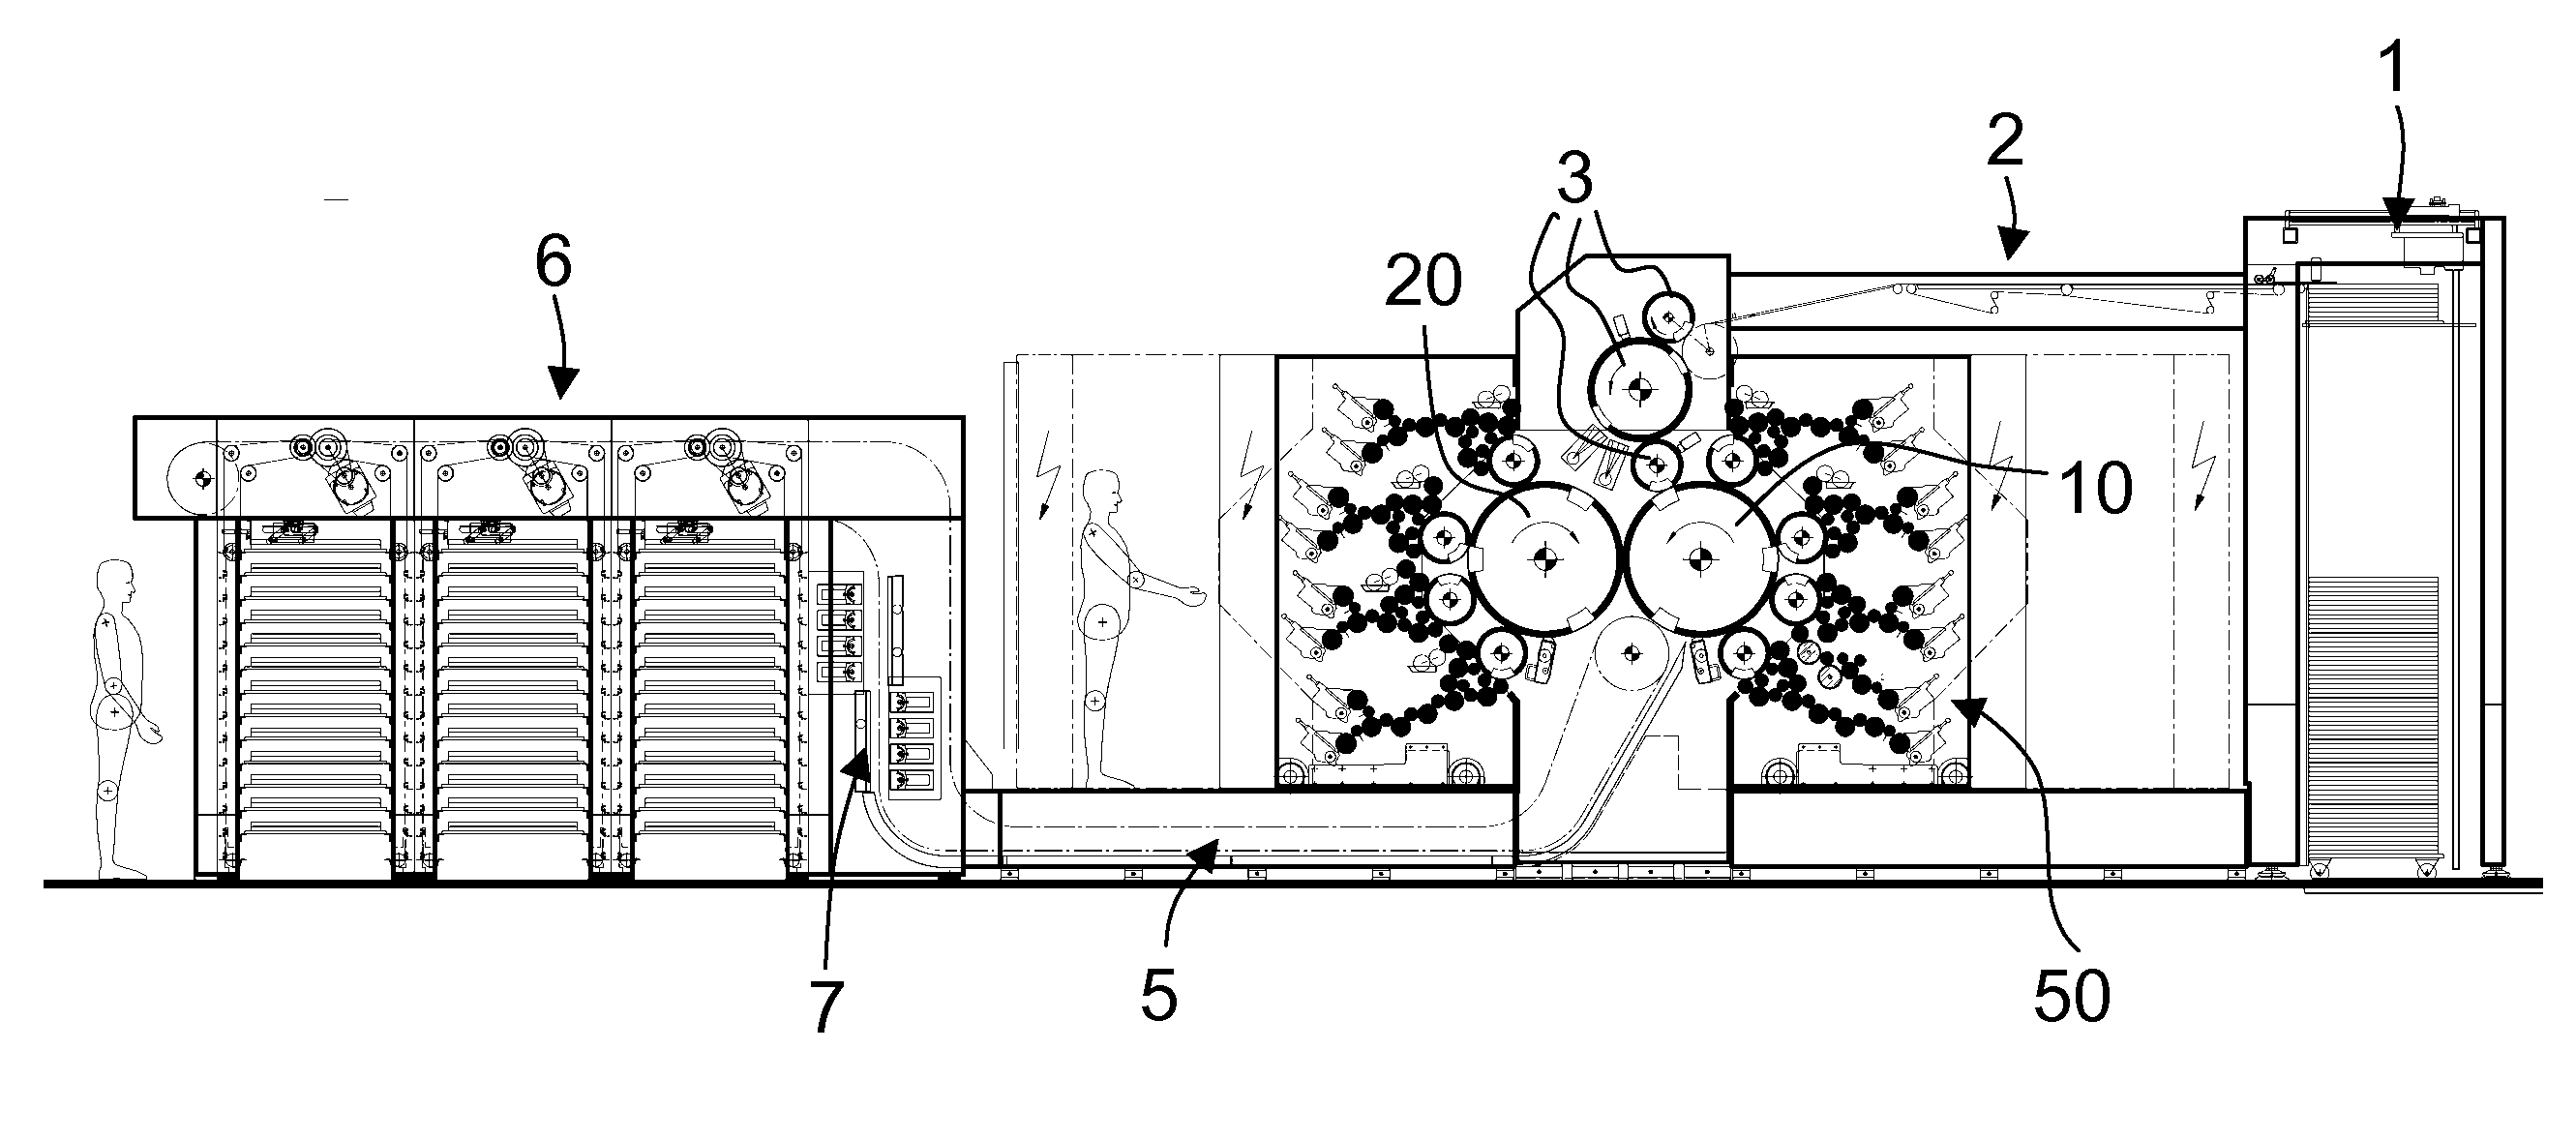 Method and Apparatus for Forming an Ink Pattern Exhibiting a Two-Dimensional Ink Gradient